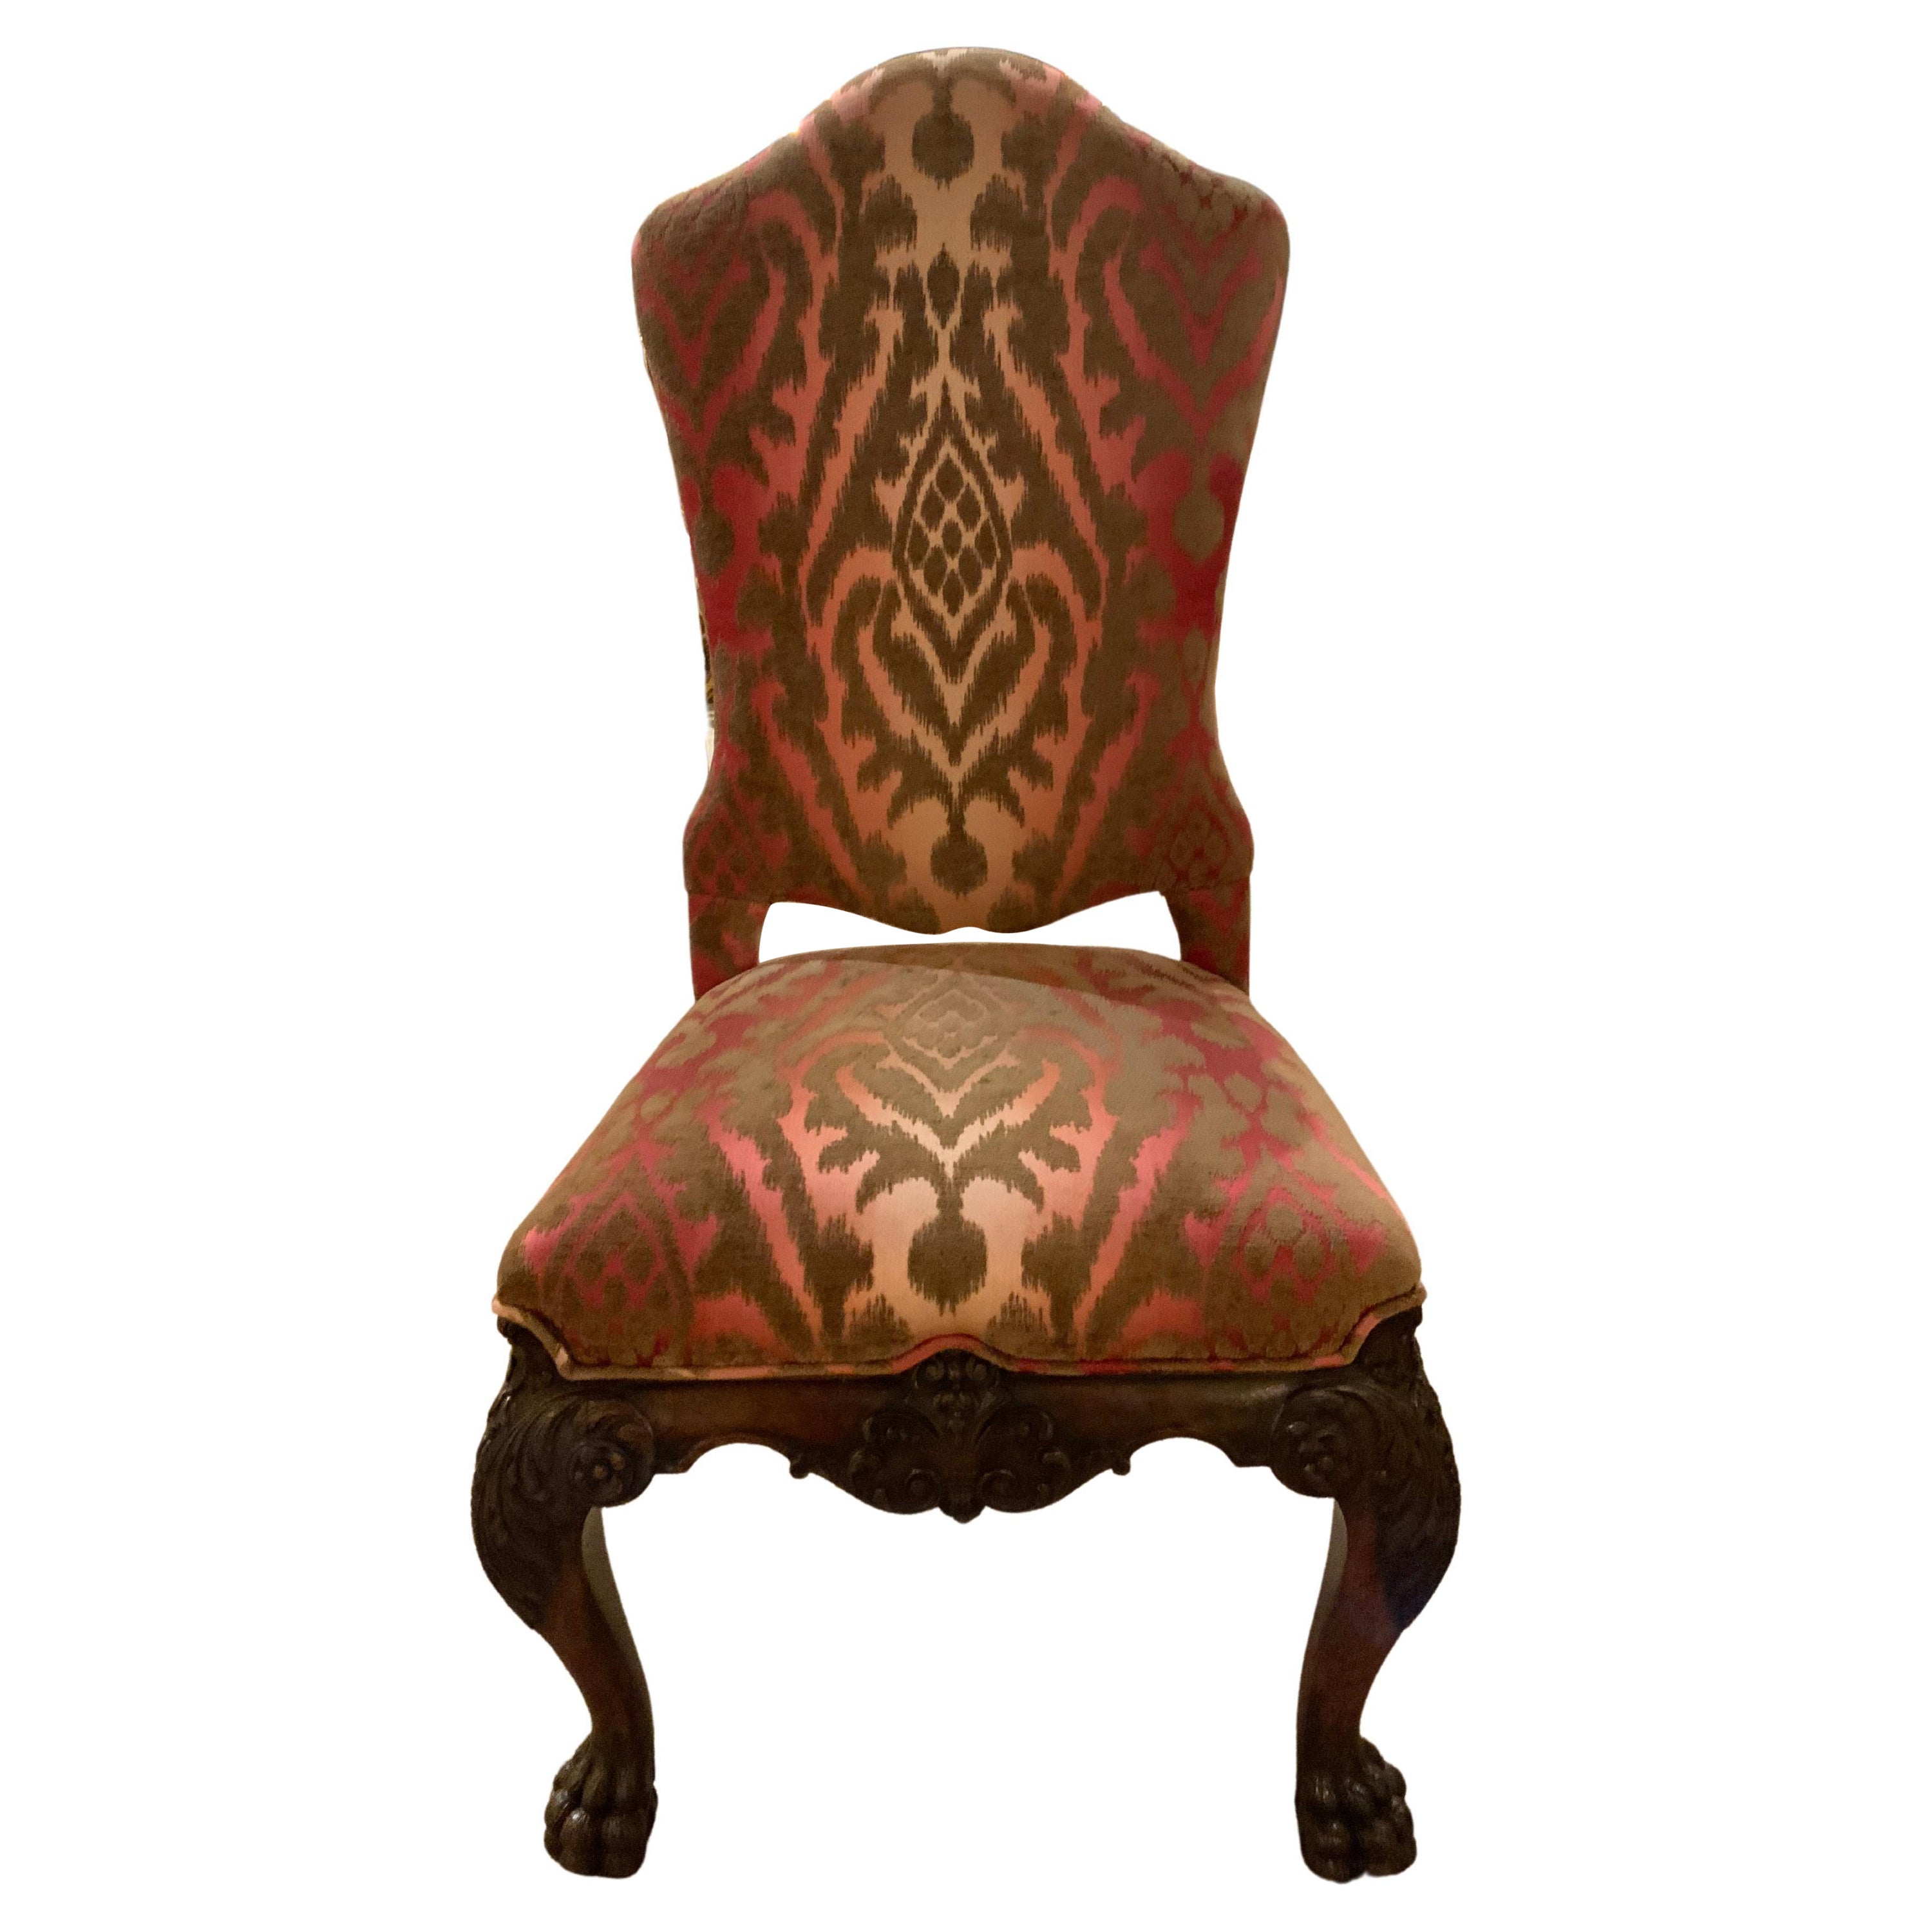 Set of Ten Dining Chairs with Upholstered High Backs Beautifully Carved Legs